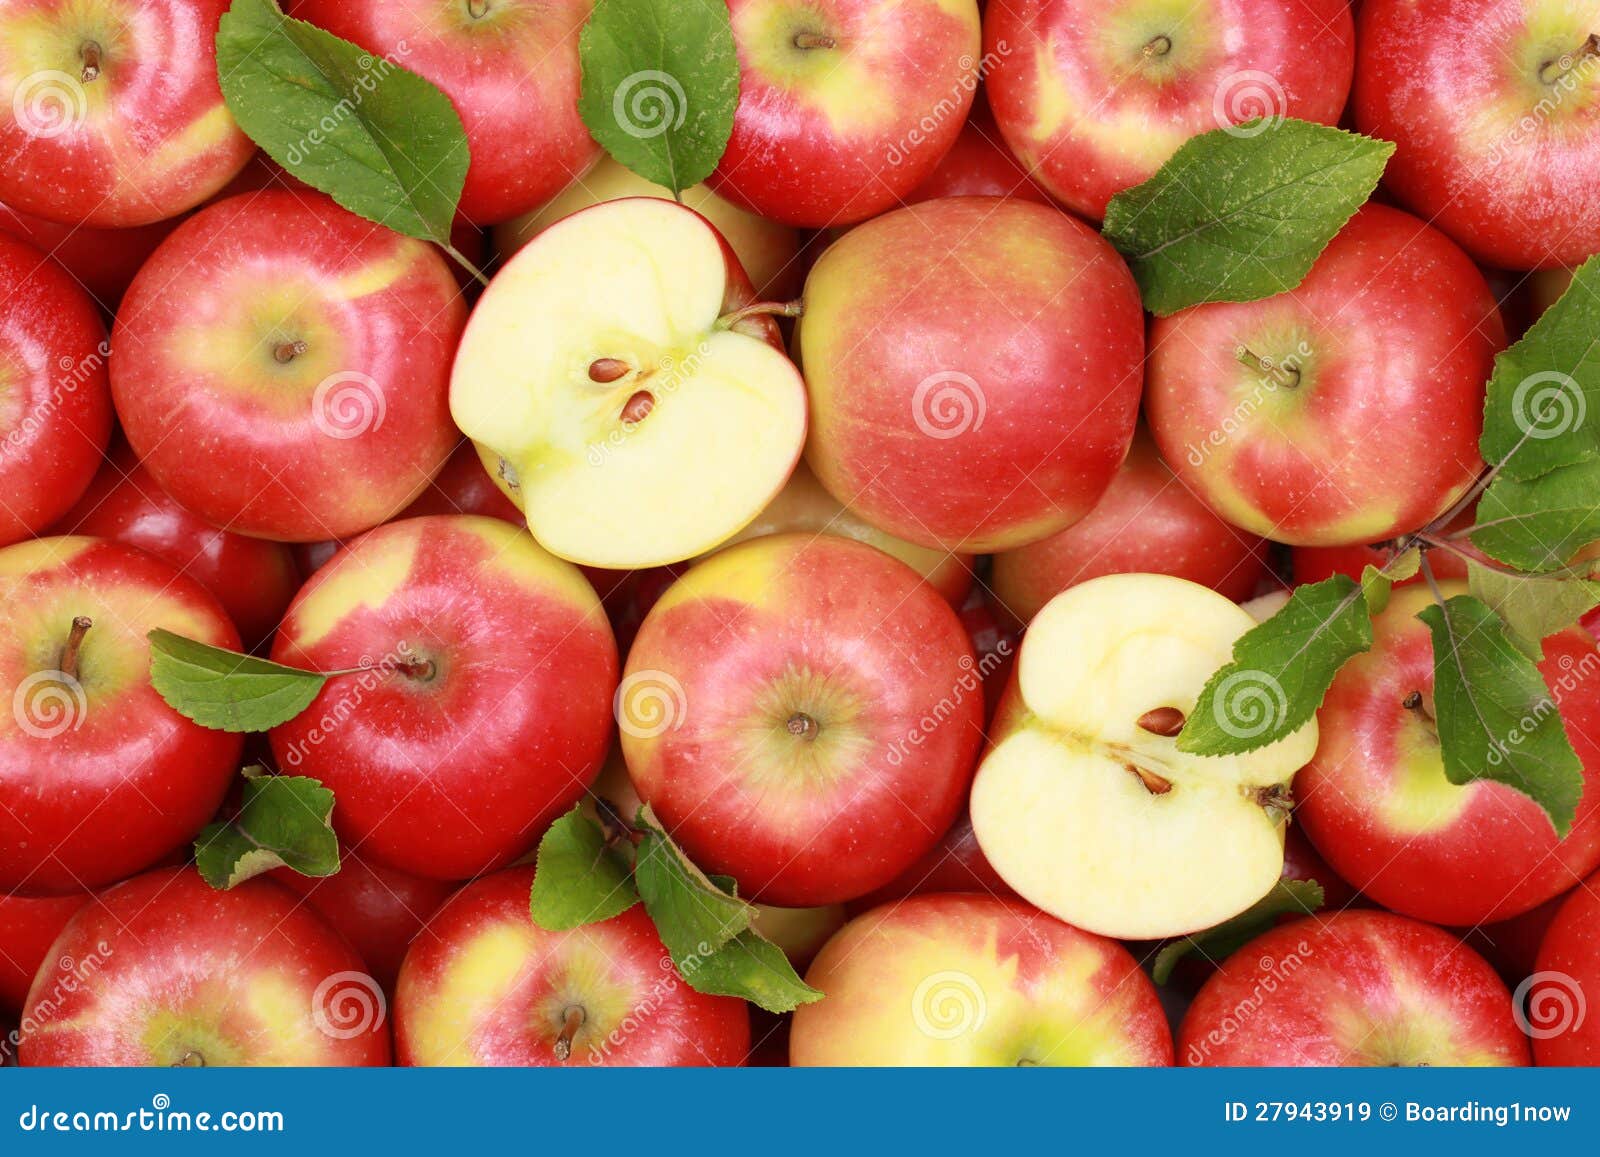 red apples with leaves